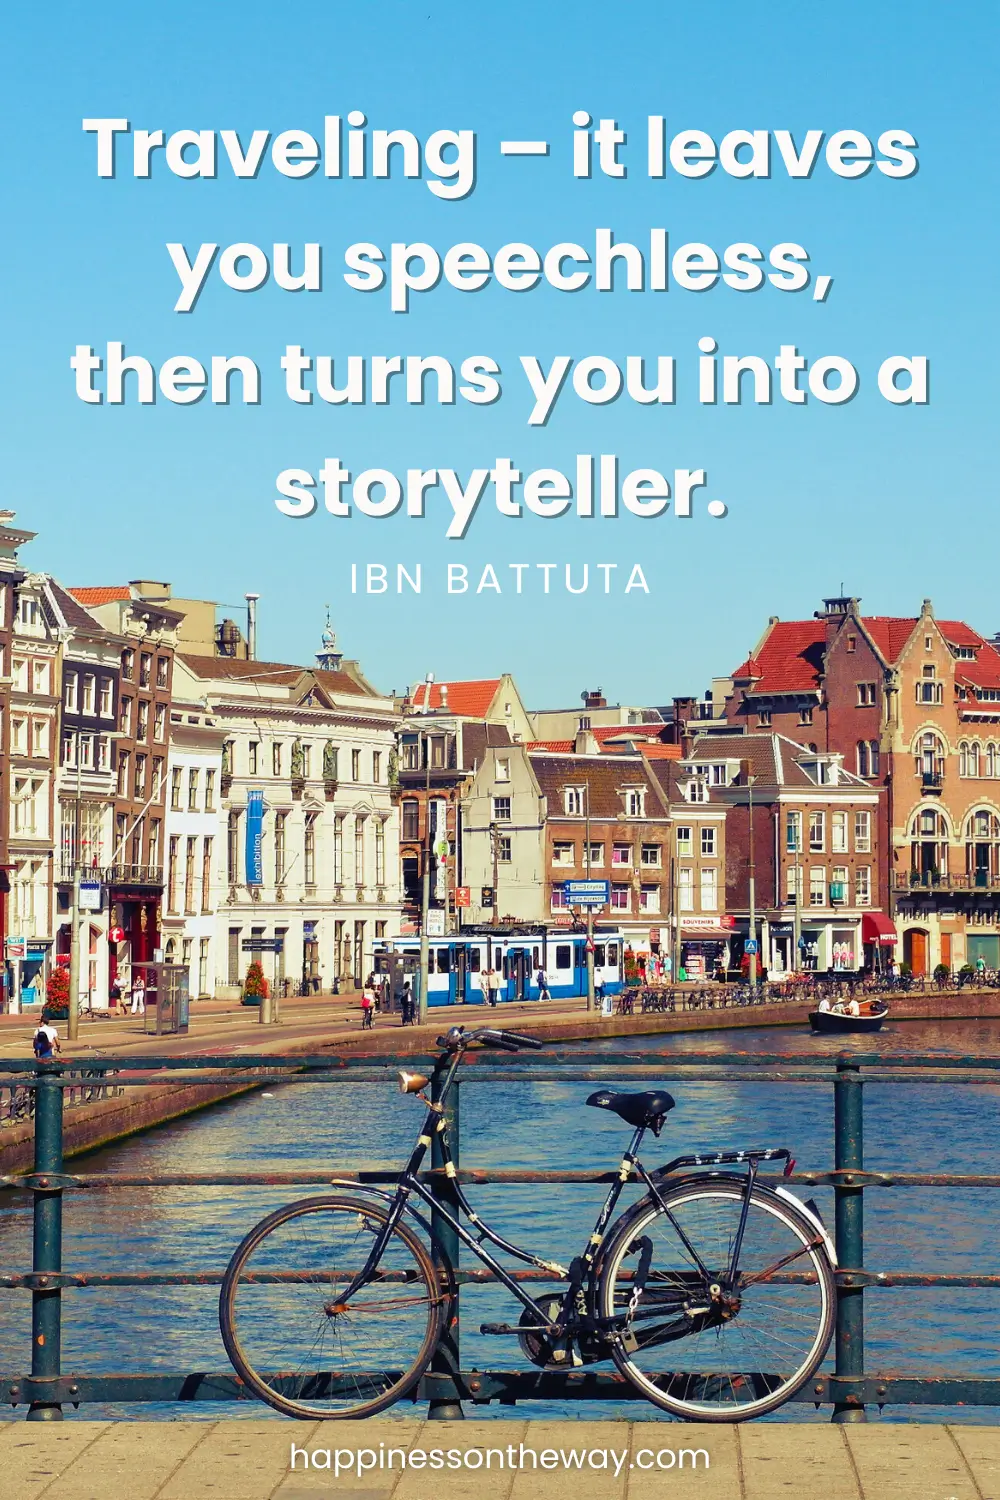 A bicycle on a bridge in Amsterdam overlooking old and colorful houses on a canal with a slow travel quote: Traveling – it leaves you speechless, then turns you into a storyteller by Ibn Battuta